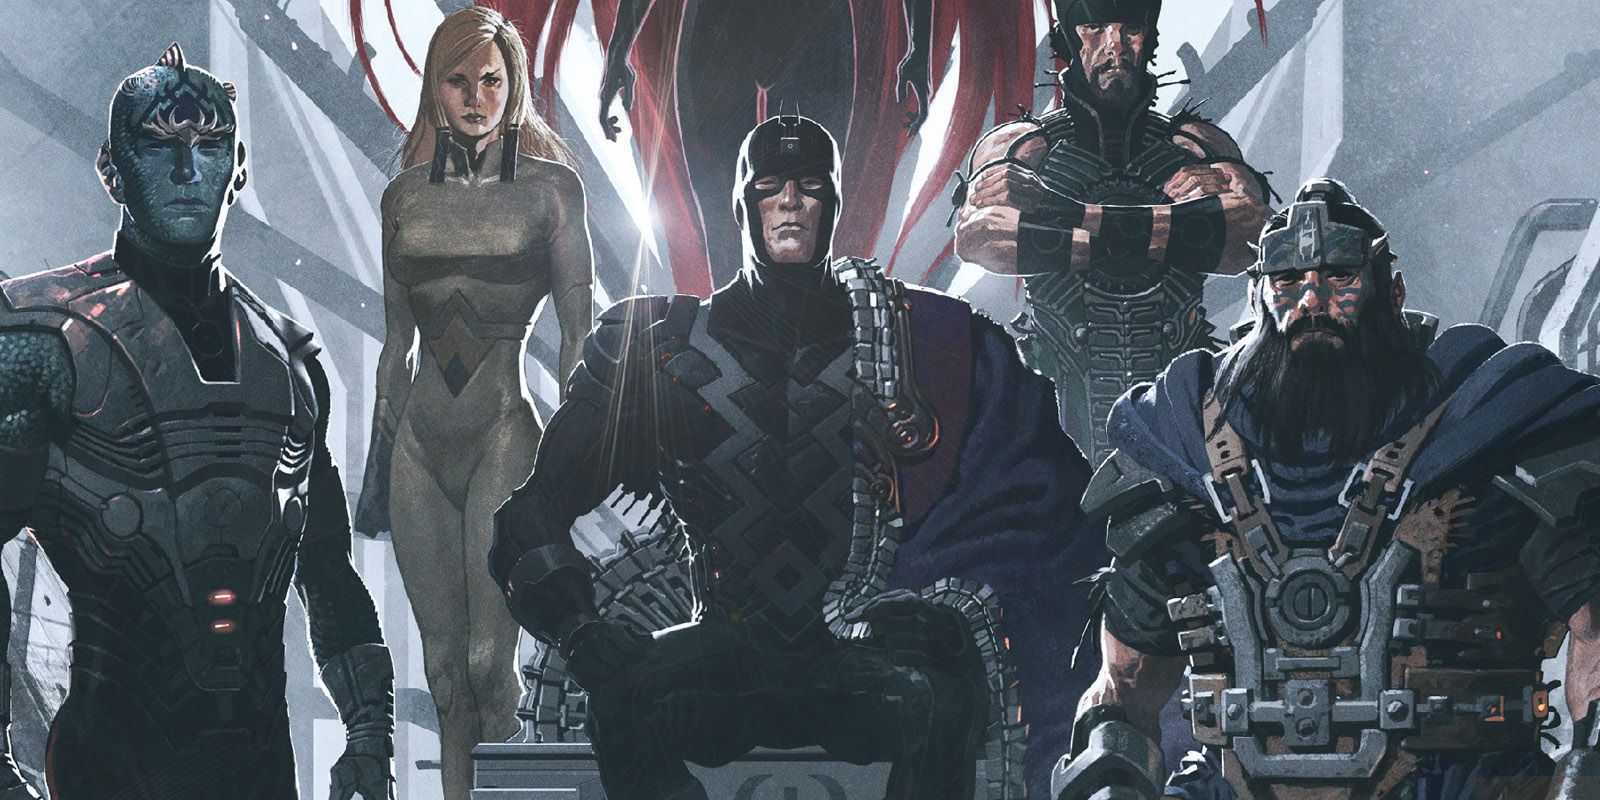 The Inhuman royal family gathered in the throne room in Marvel Comics